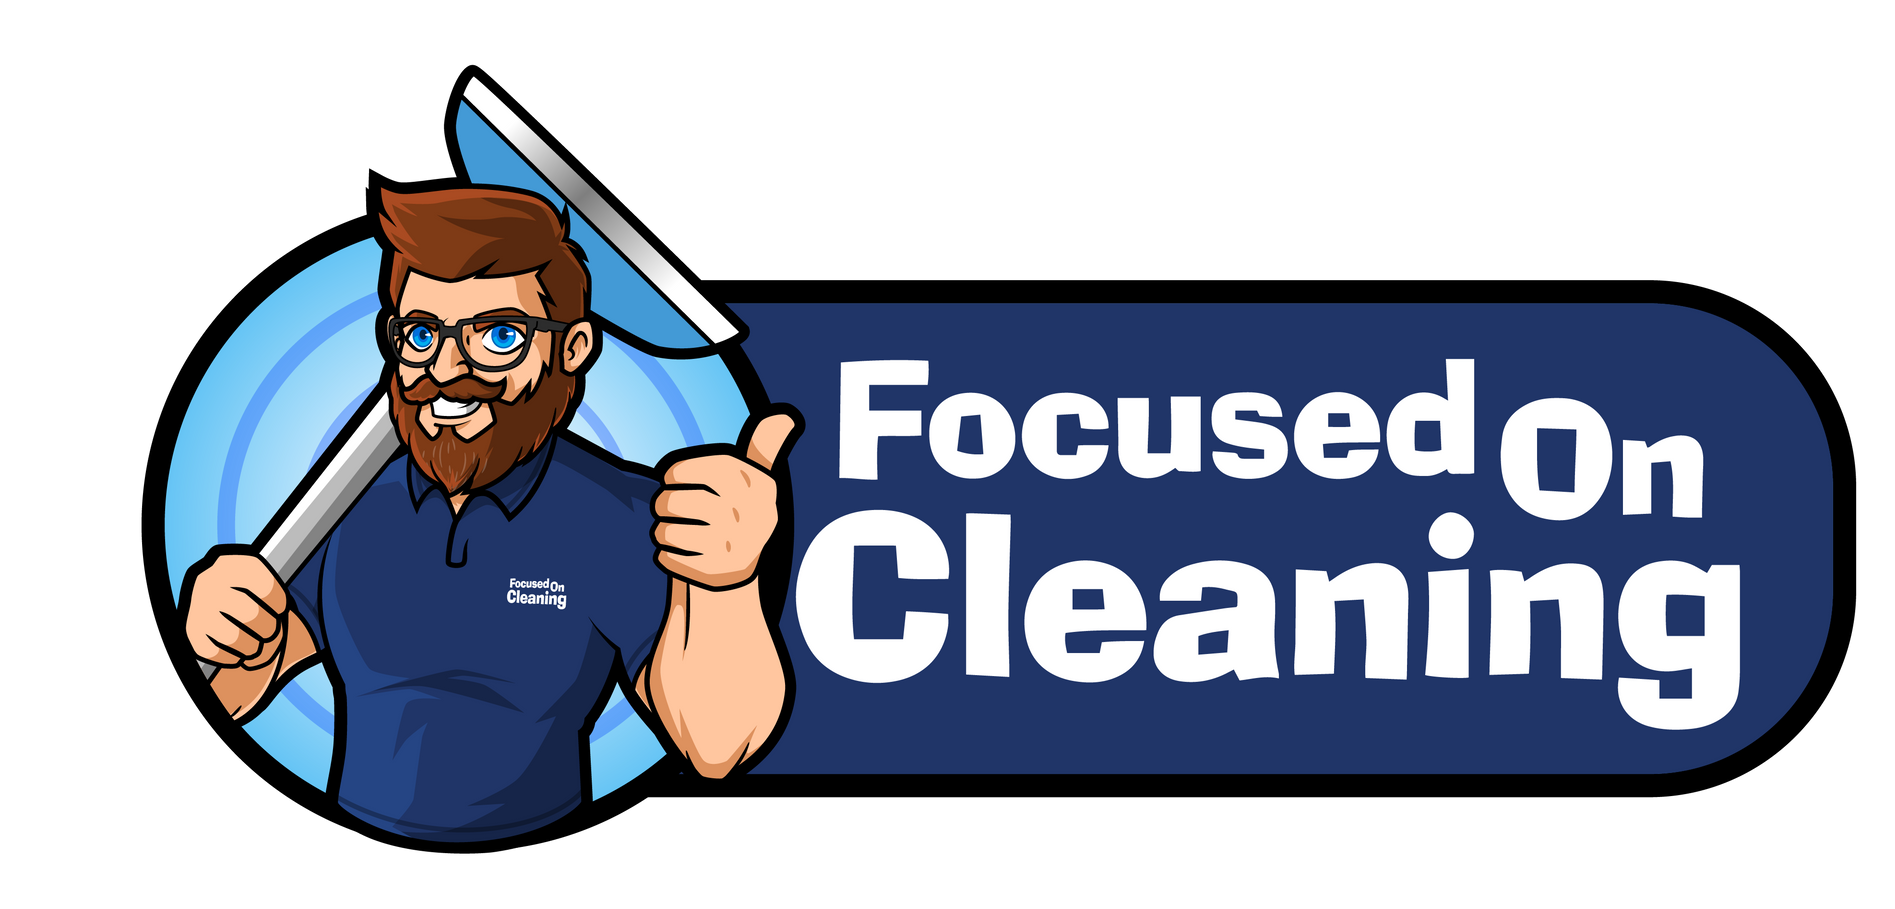 Focused on Cleaning Logo with white text and dark blue backgound with a bearded man holding acarpet cleaning tool to the left.